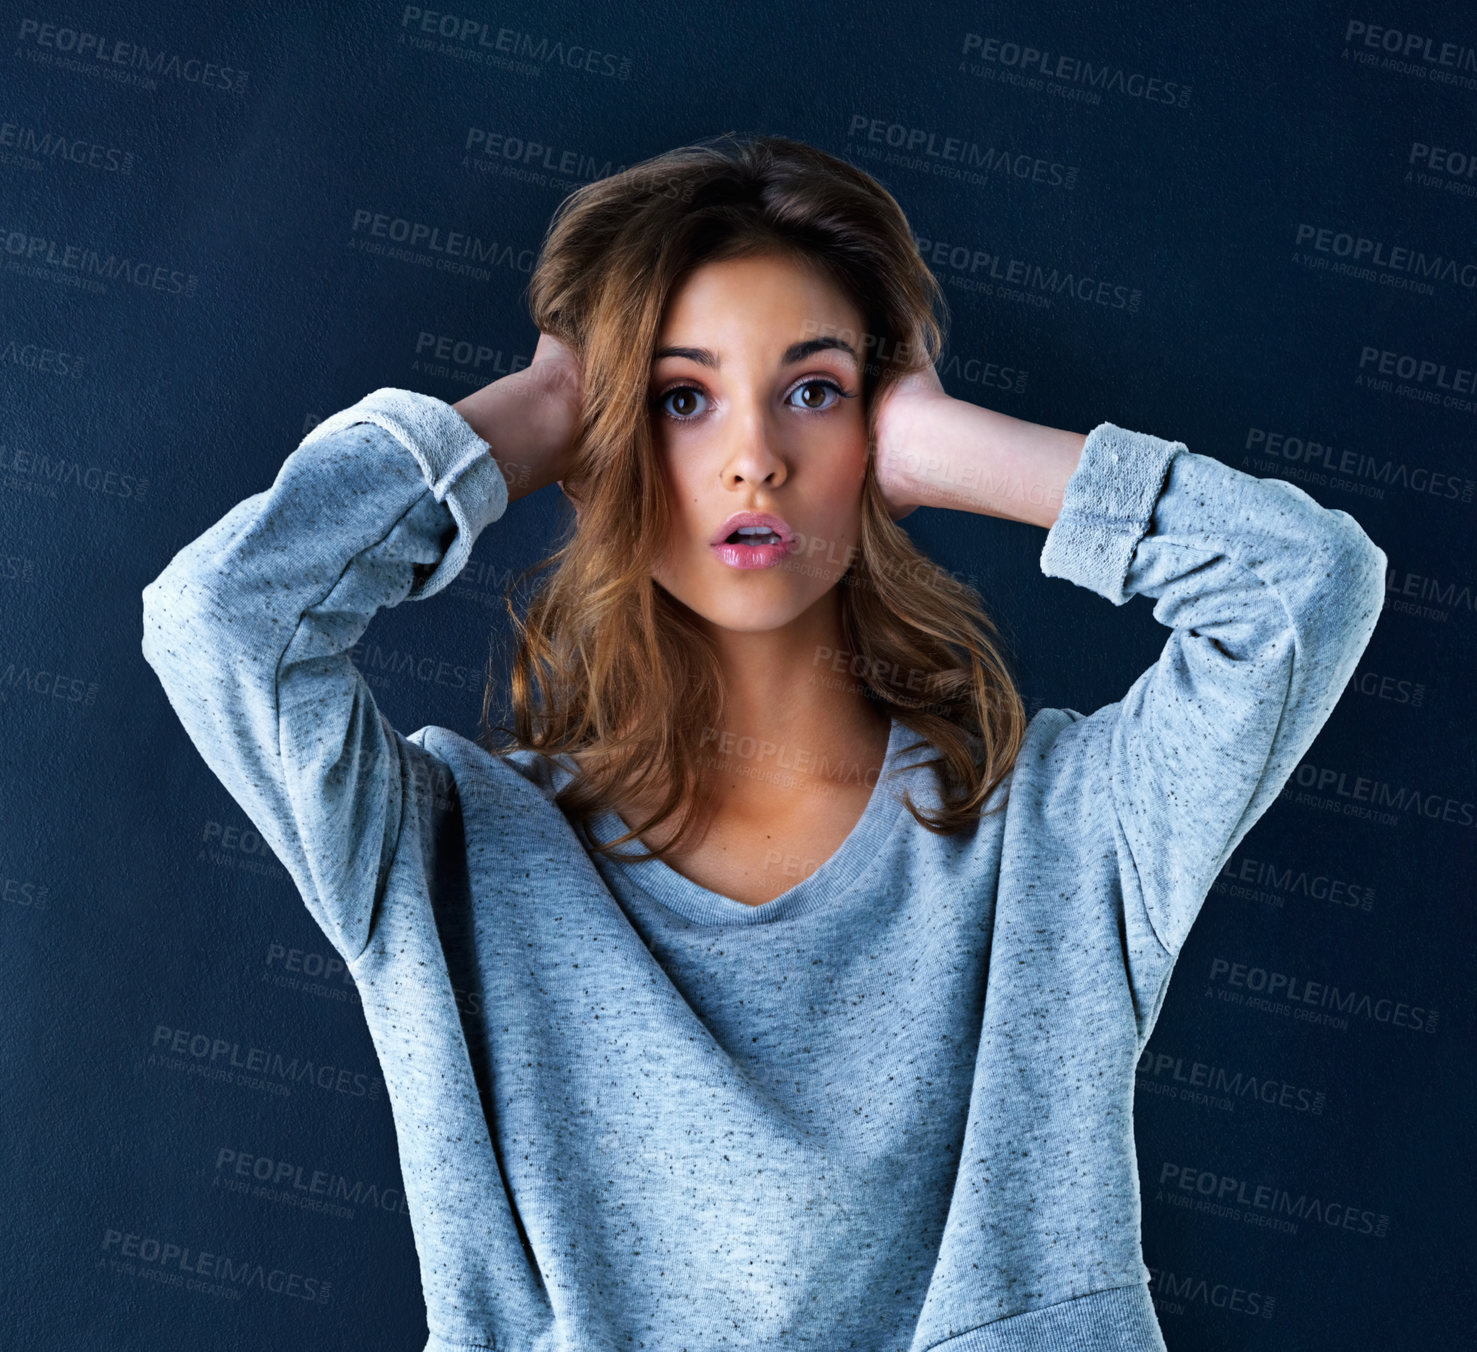 Buy stock photo Studio portrait of a cute teenage girl looking surprised with her hands over her ears posing against a dark background